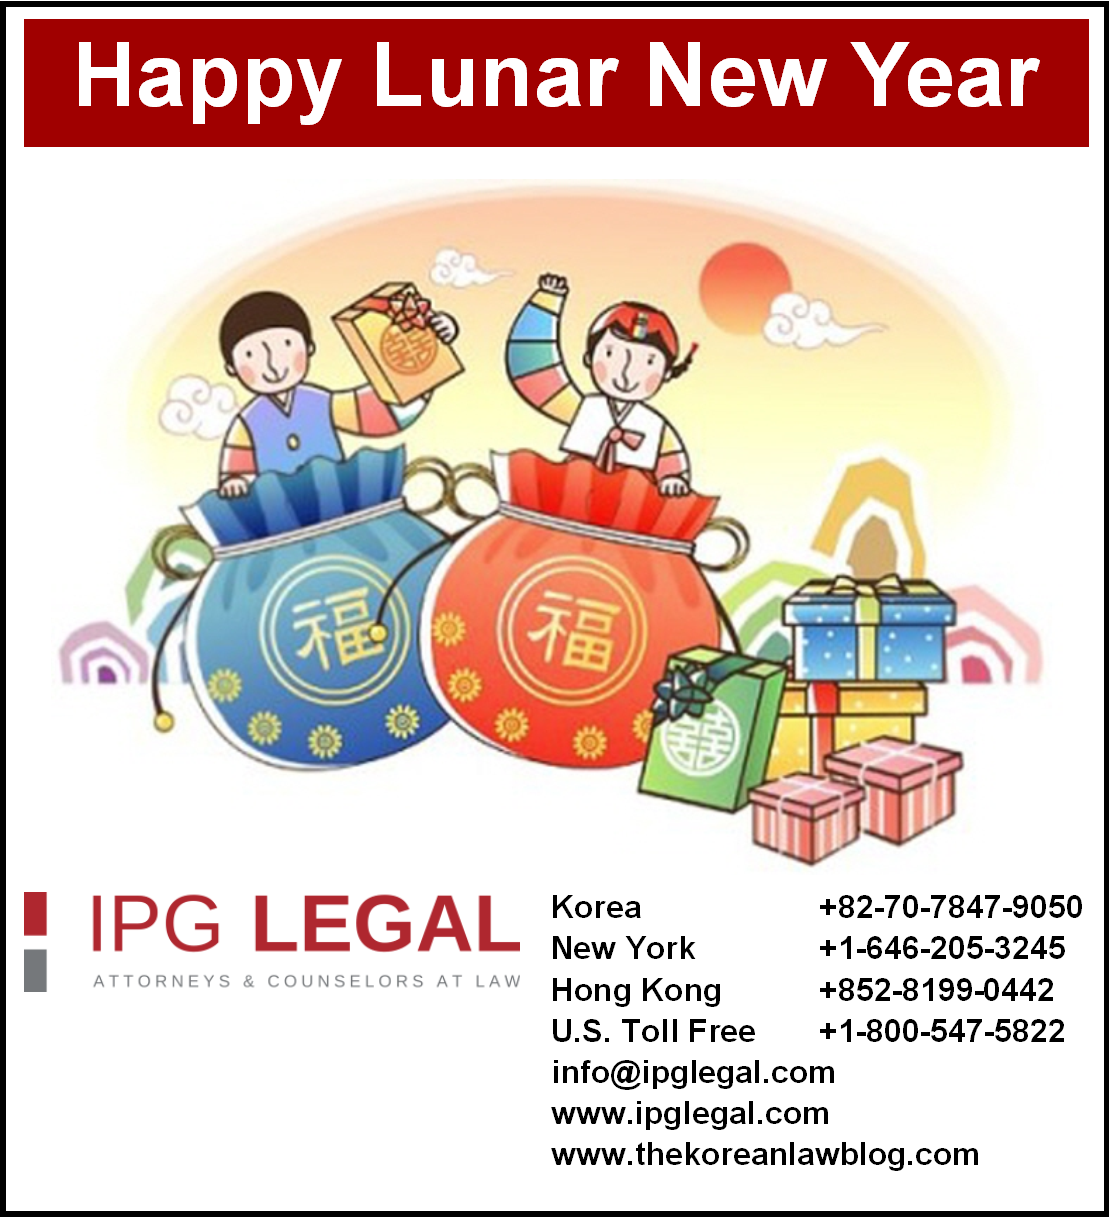 Happy Lunar New Year From Ipg Legal